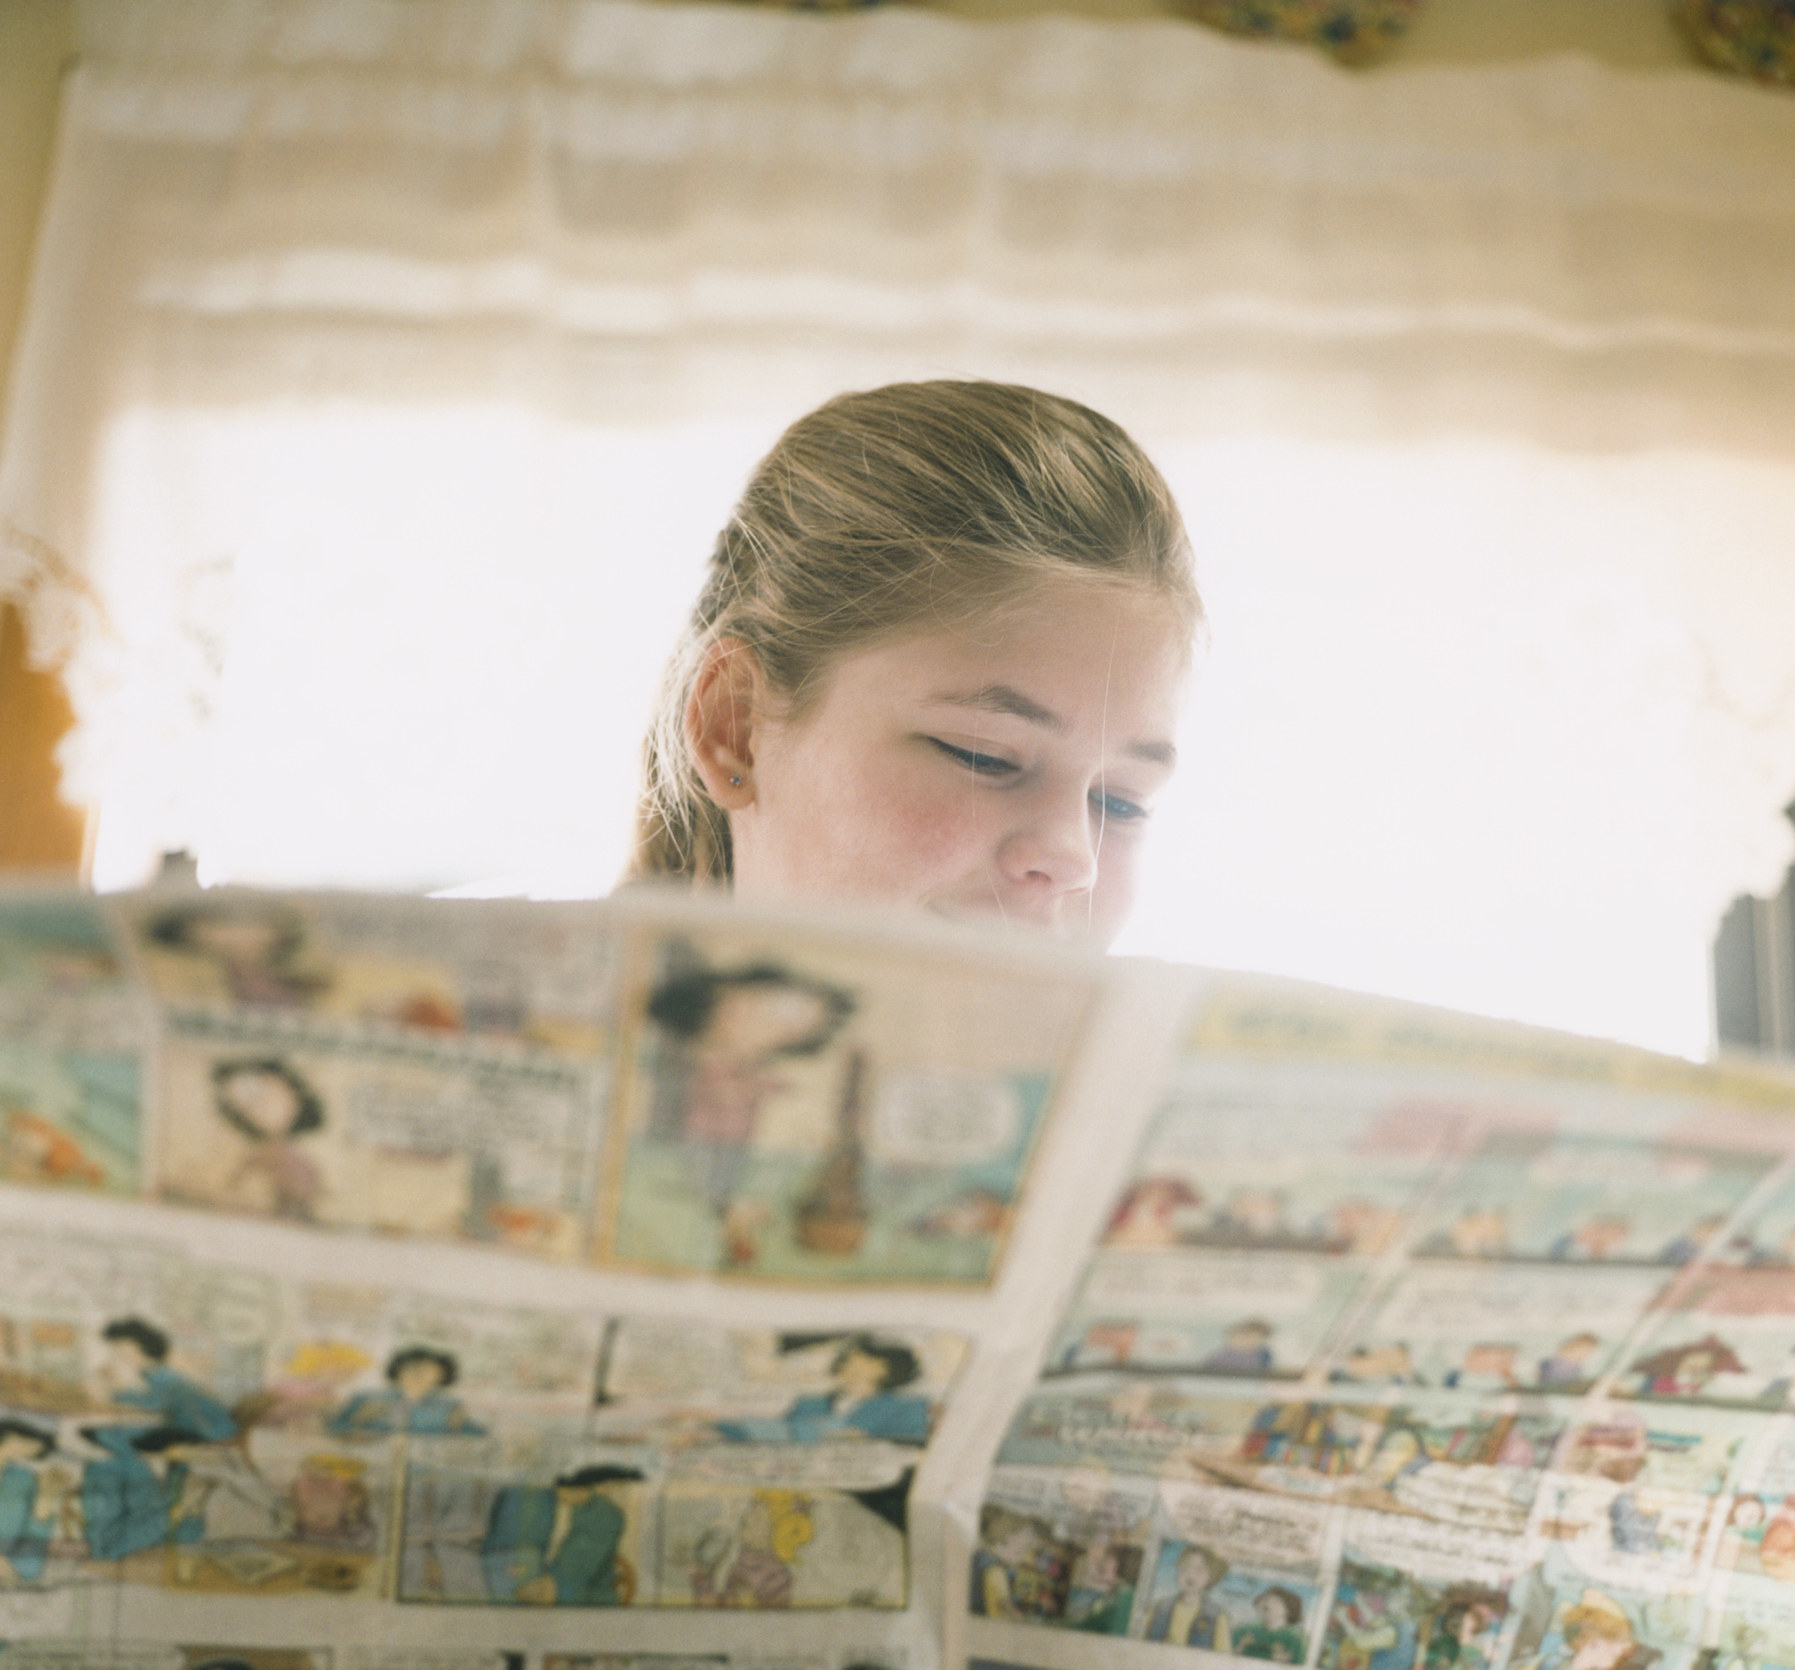 Little girl reading comics page